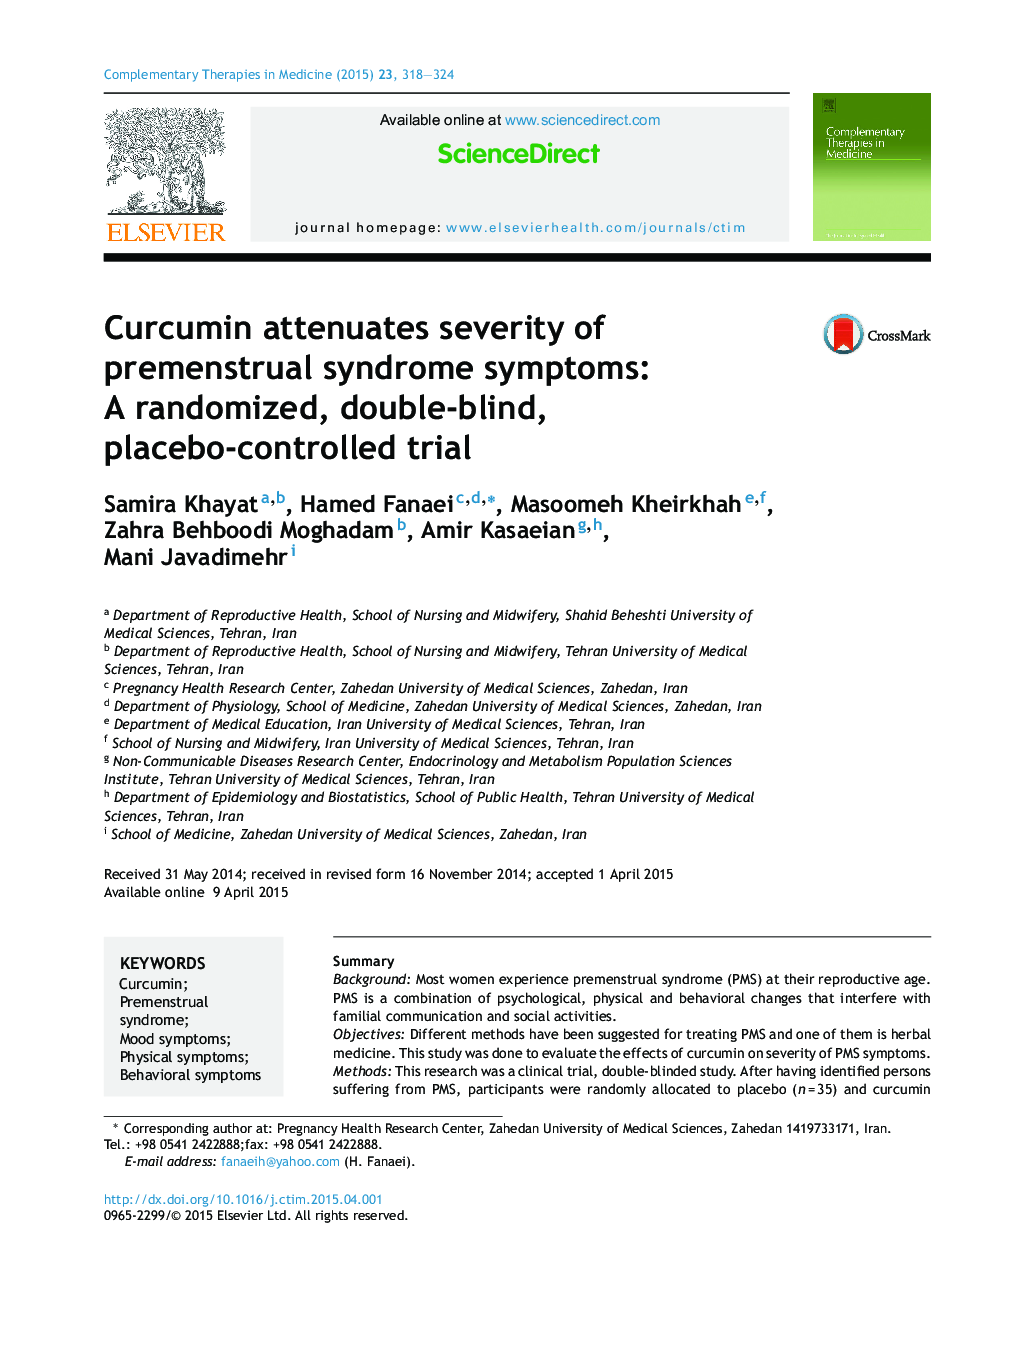 Curcumin attenuates severity of premenstrual syndrome symptoms: A randomized, double-blind, placebo-controlled trial